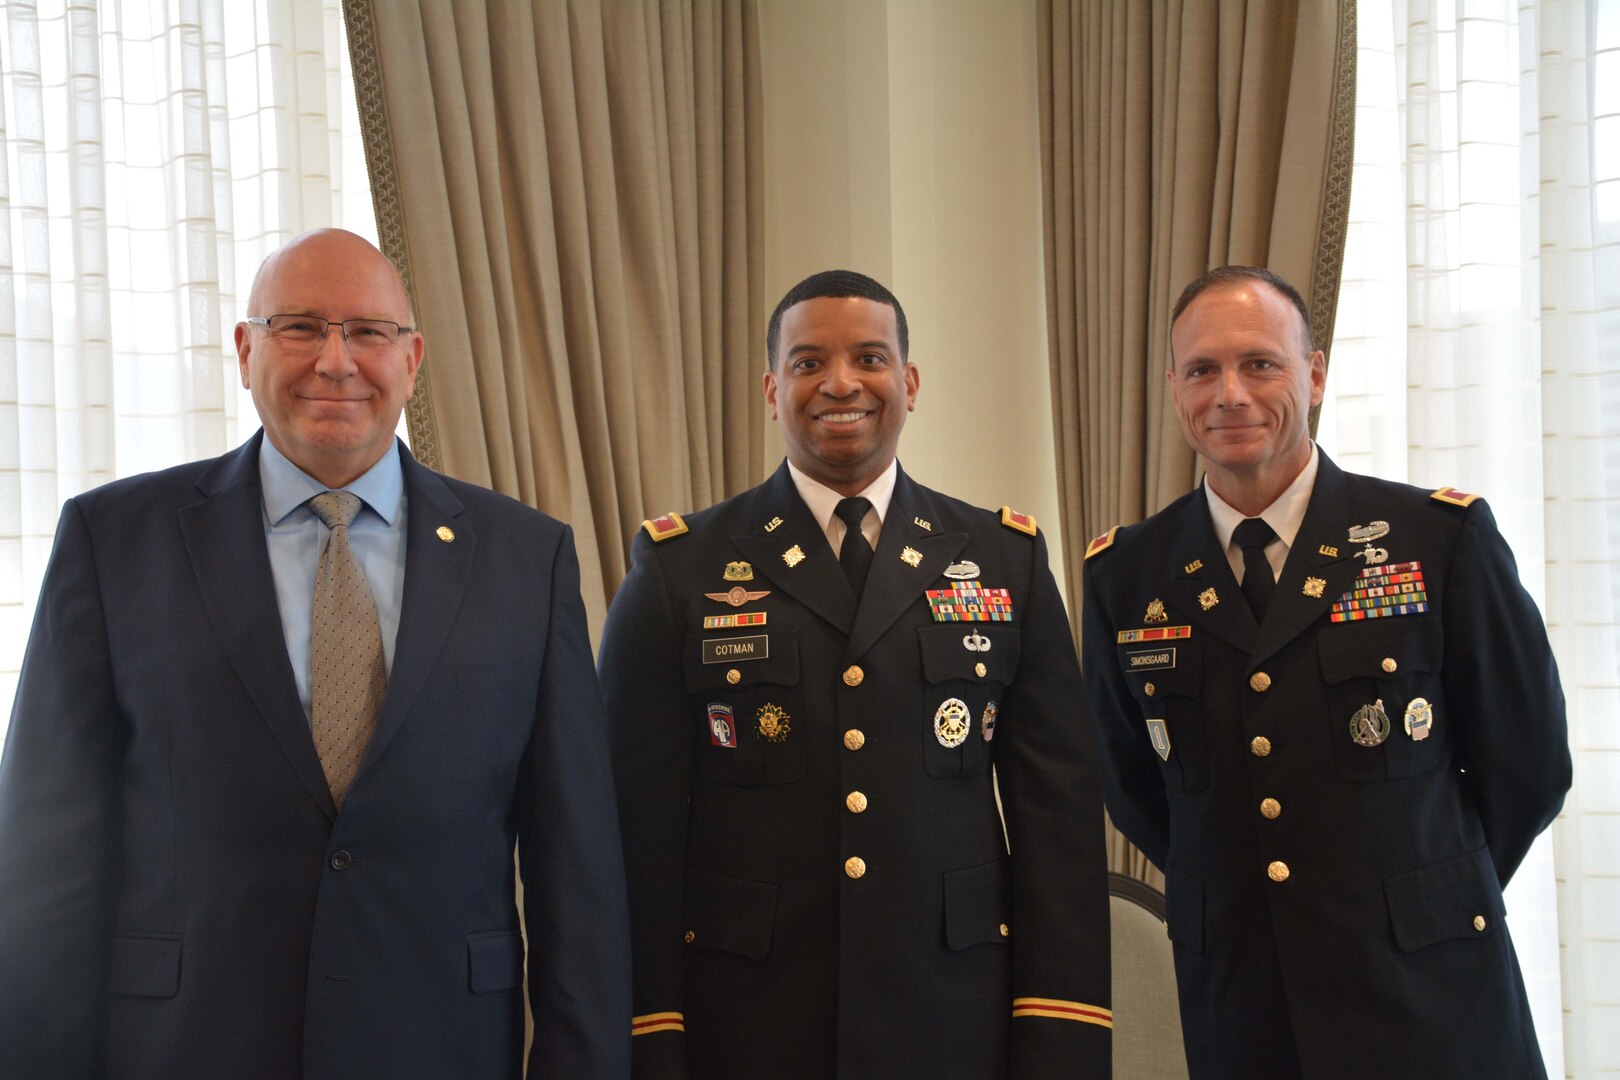 Three men stand together, one is dressed in a business suit and two are wearing Army officer dress uniforms.